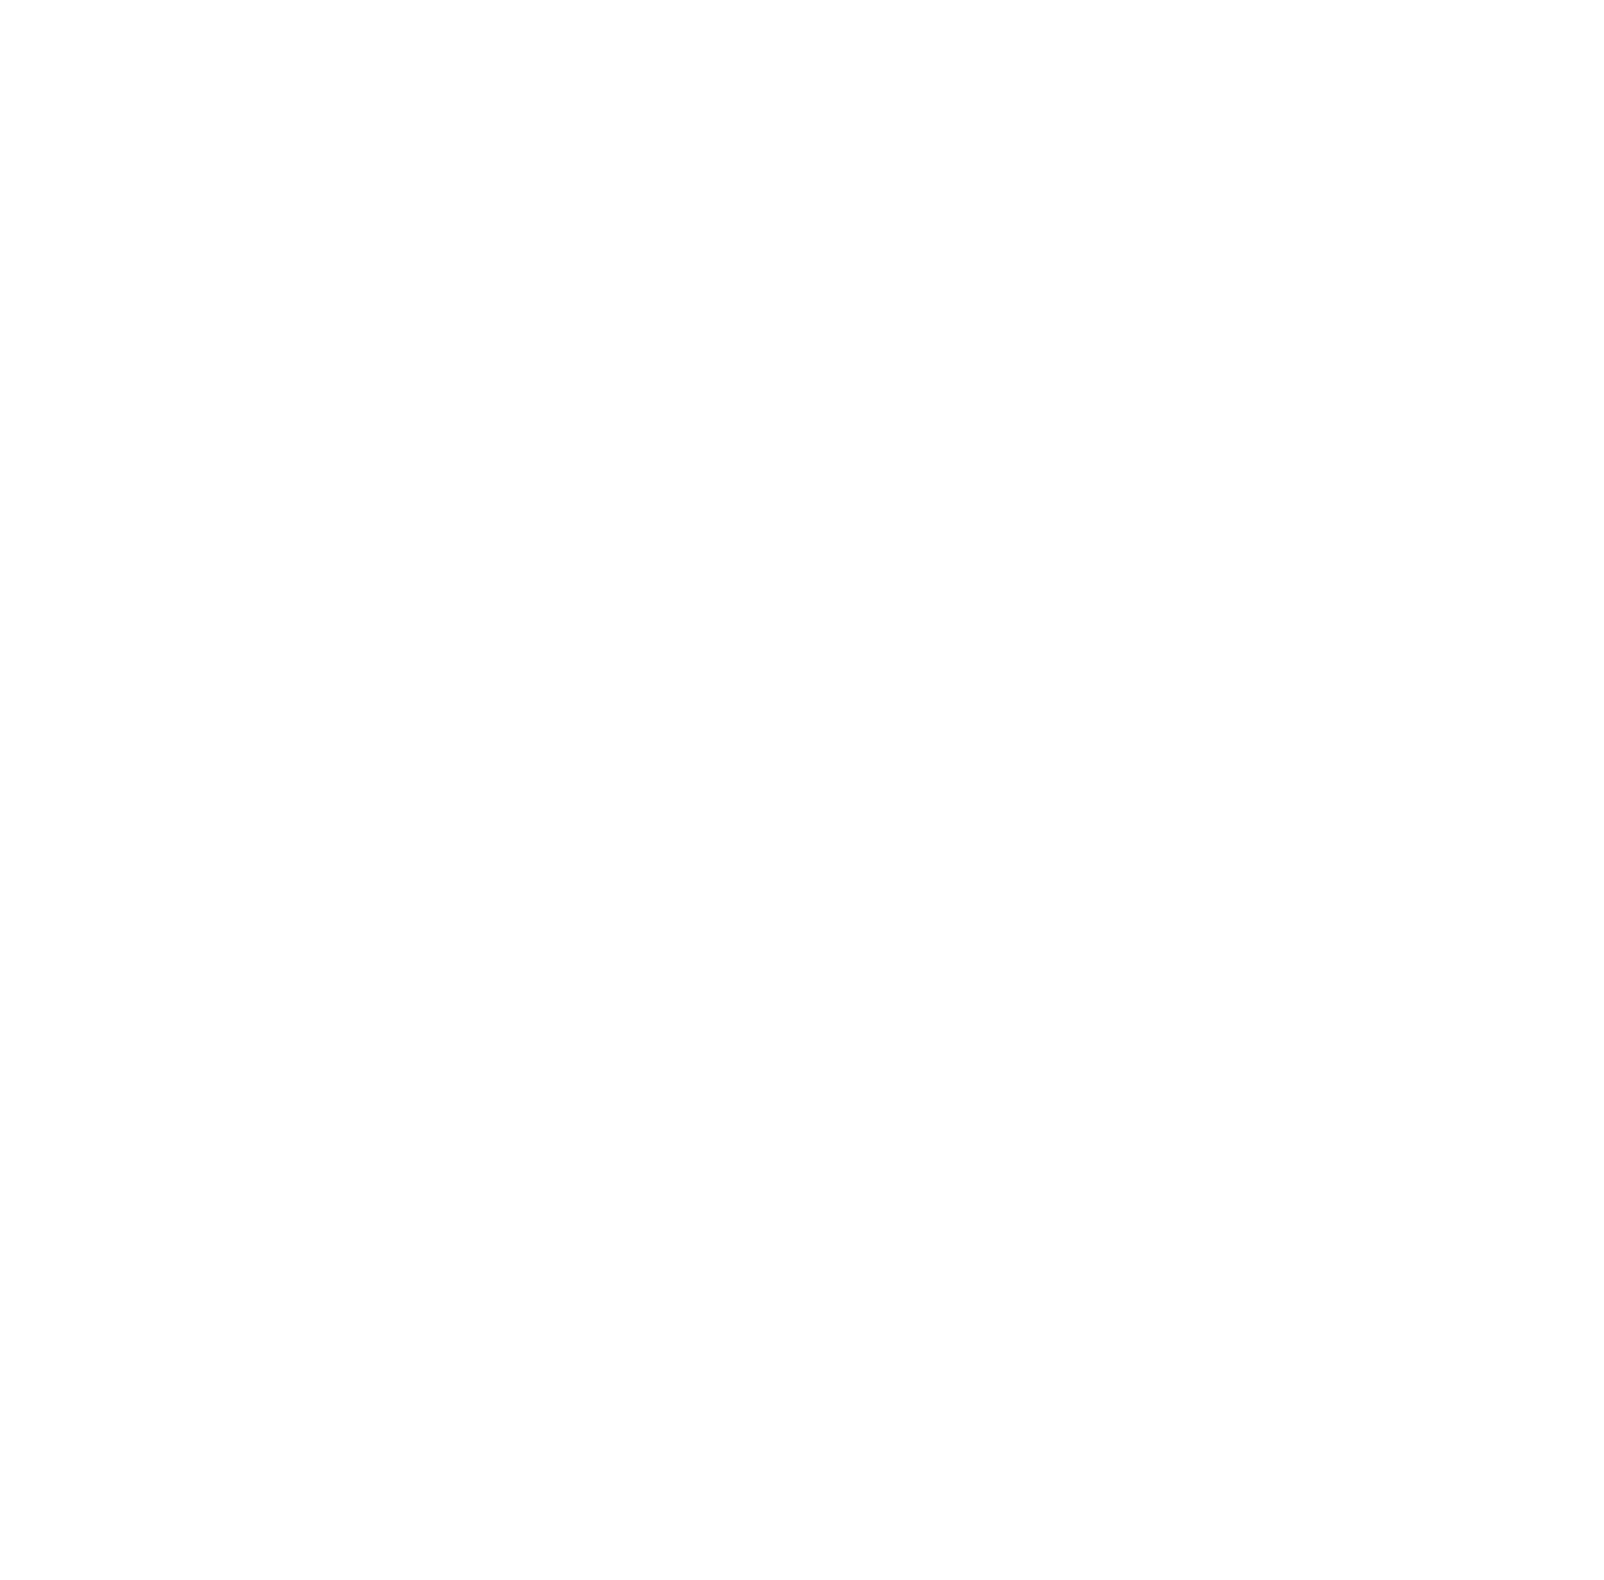 Qatar Electricity & Water Company logo pour fonds sombres (PNG transparent)